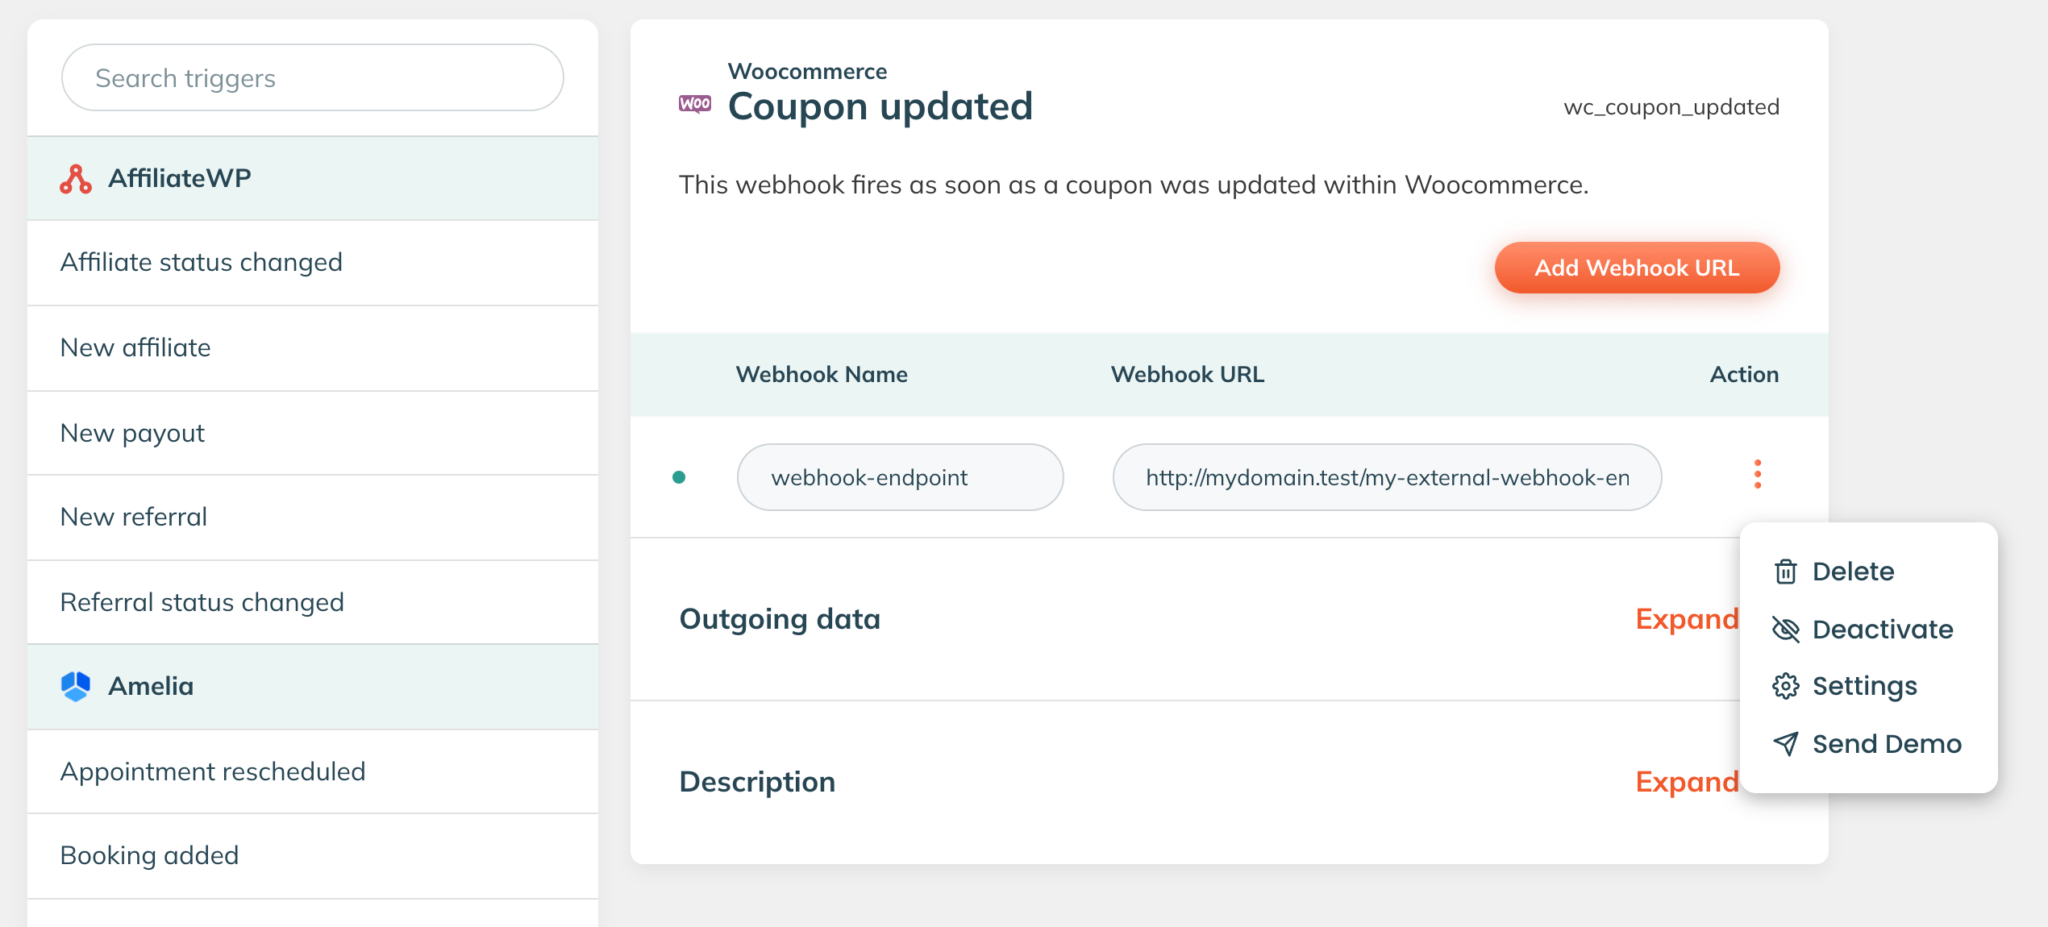 The WP Webhooks screen of the Contact tag added trigger